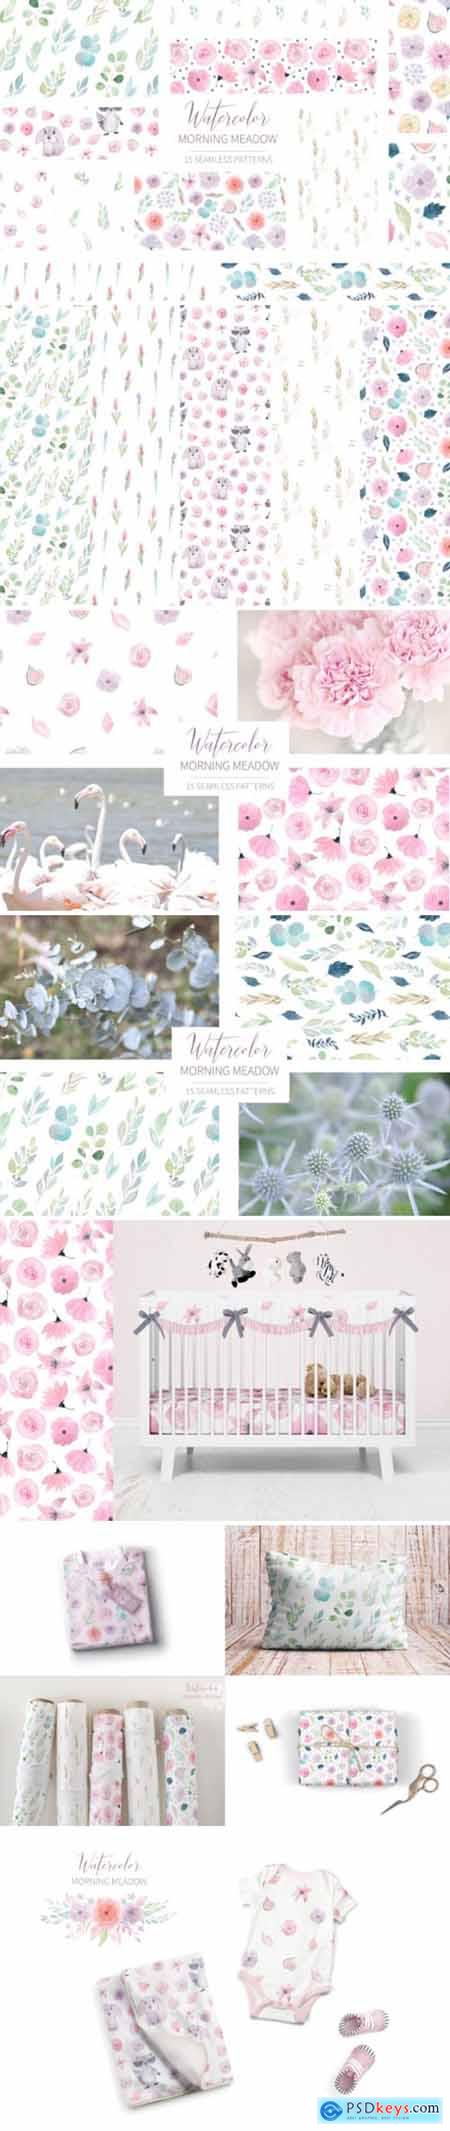 15 Morning Meadow Seamless Patterns 3515014